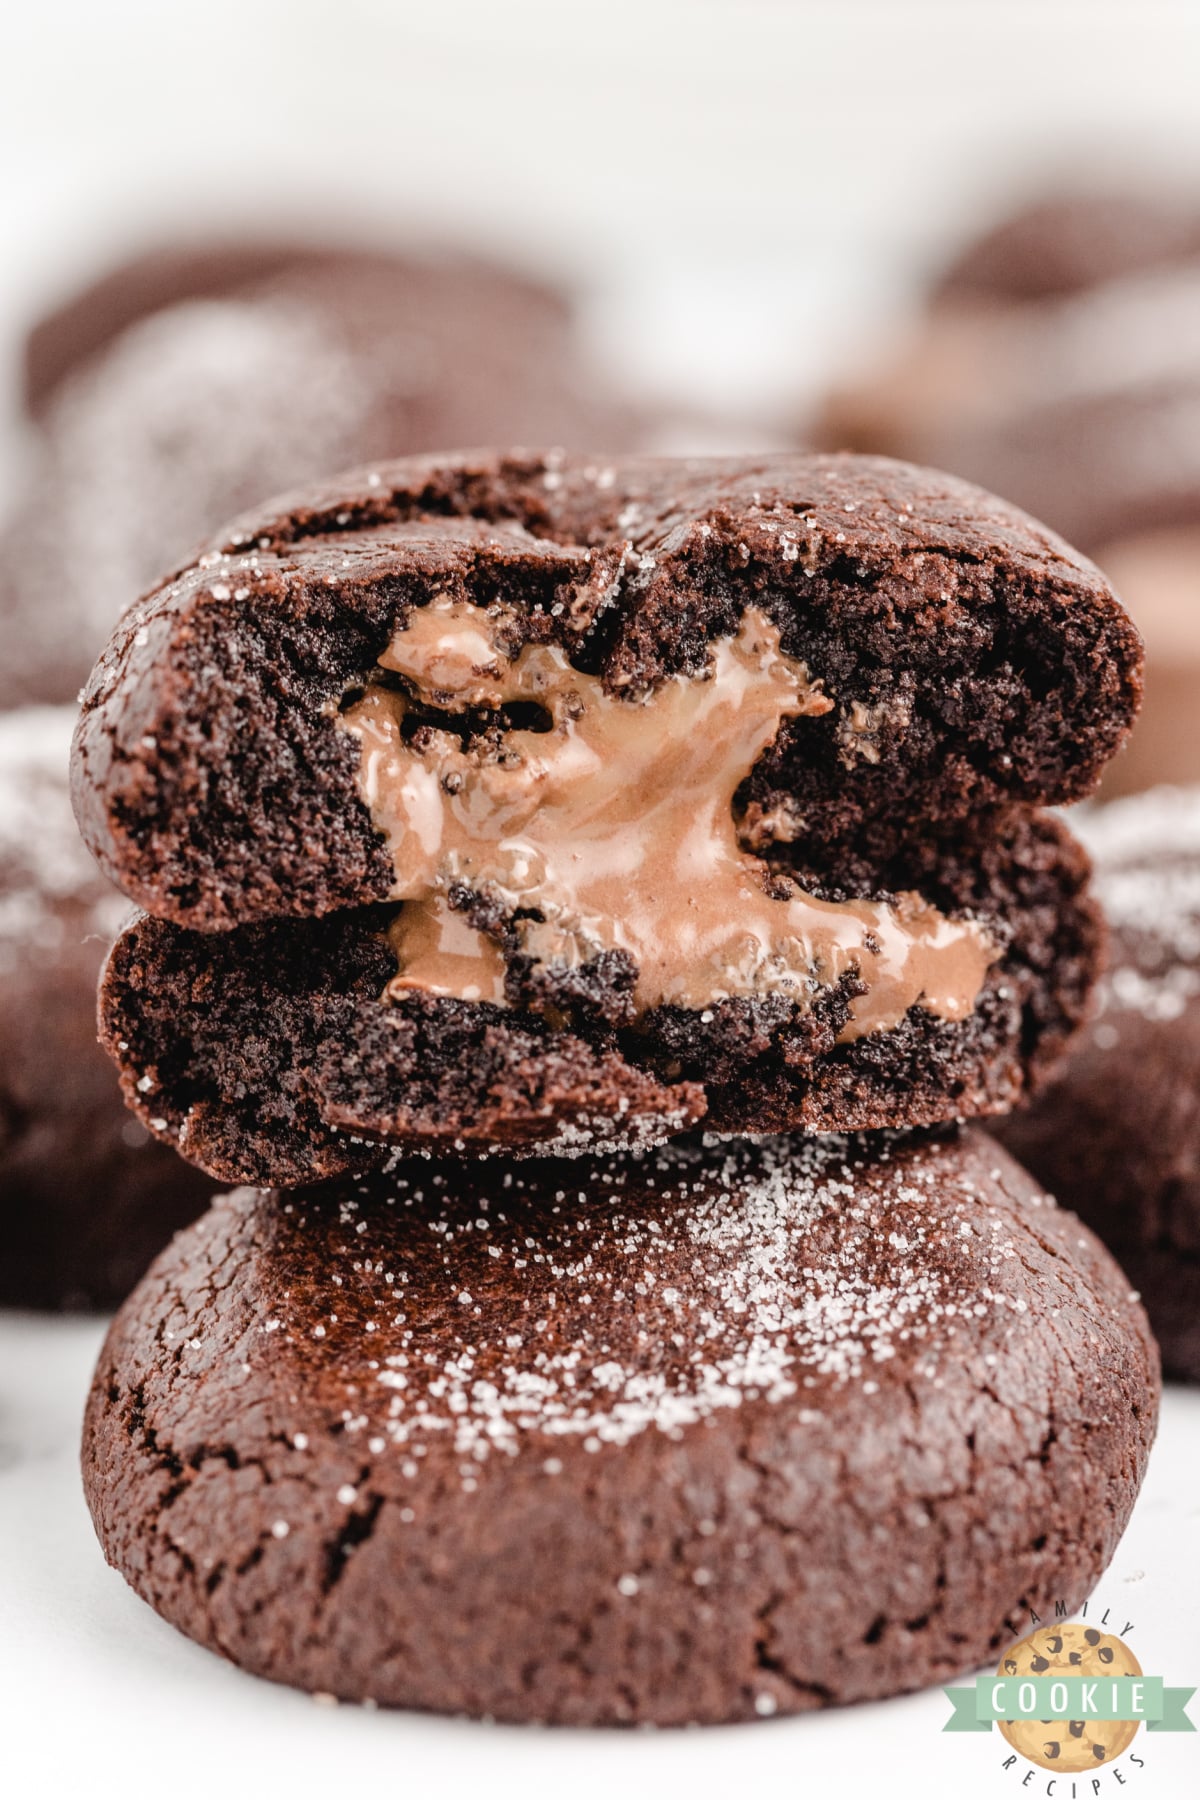 Cake Mix Rolo Cookies are made with only 4 ingredients - one of which is the Rolo tucked in the middle! These cookies are so easy to make, and they are absolutely delicious with the gooey caramel centers.